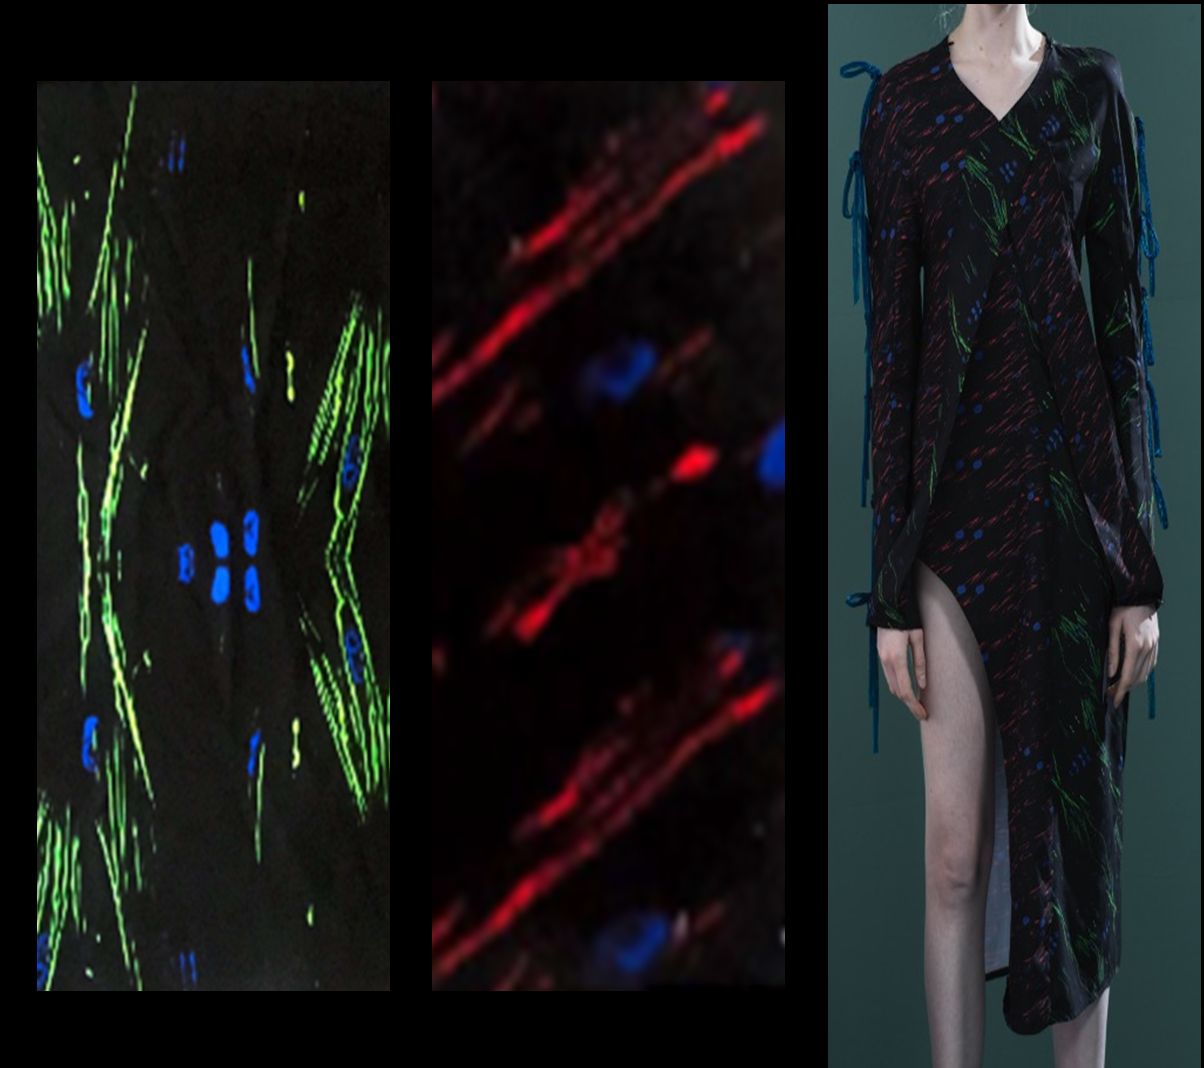 Fashion designs printed cotton material, and dresses made using histologic images from stem cell experiments by Zhu He (Irene)